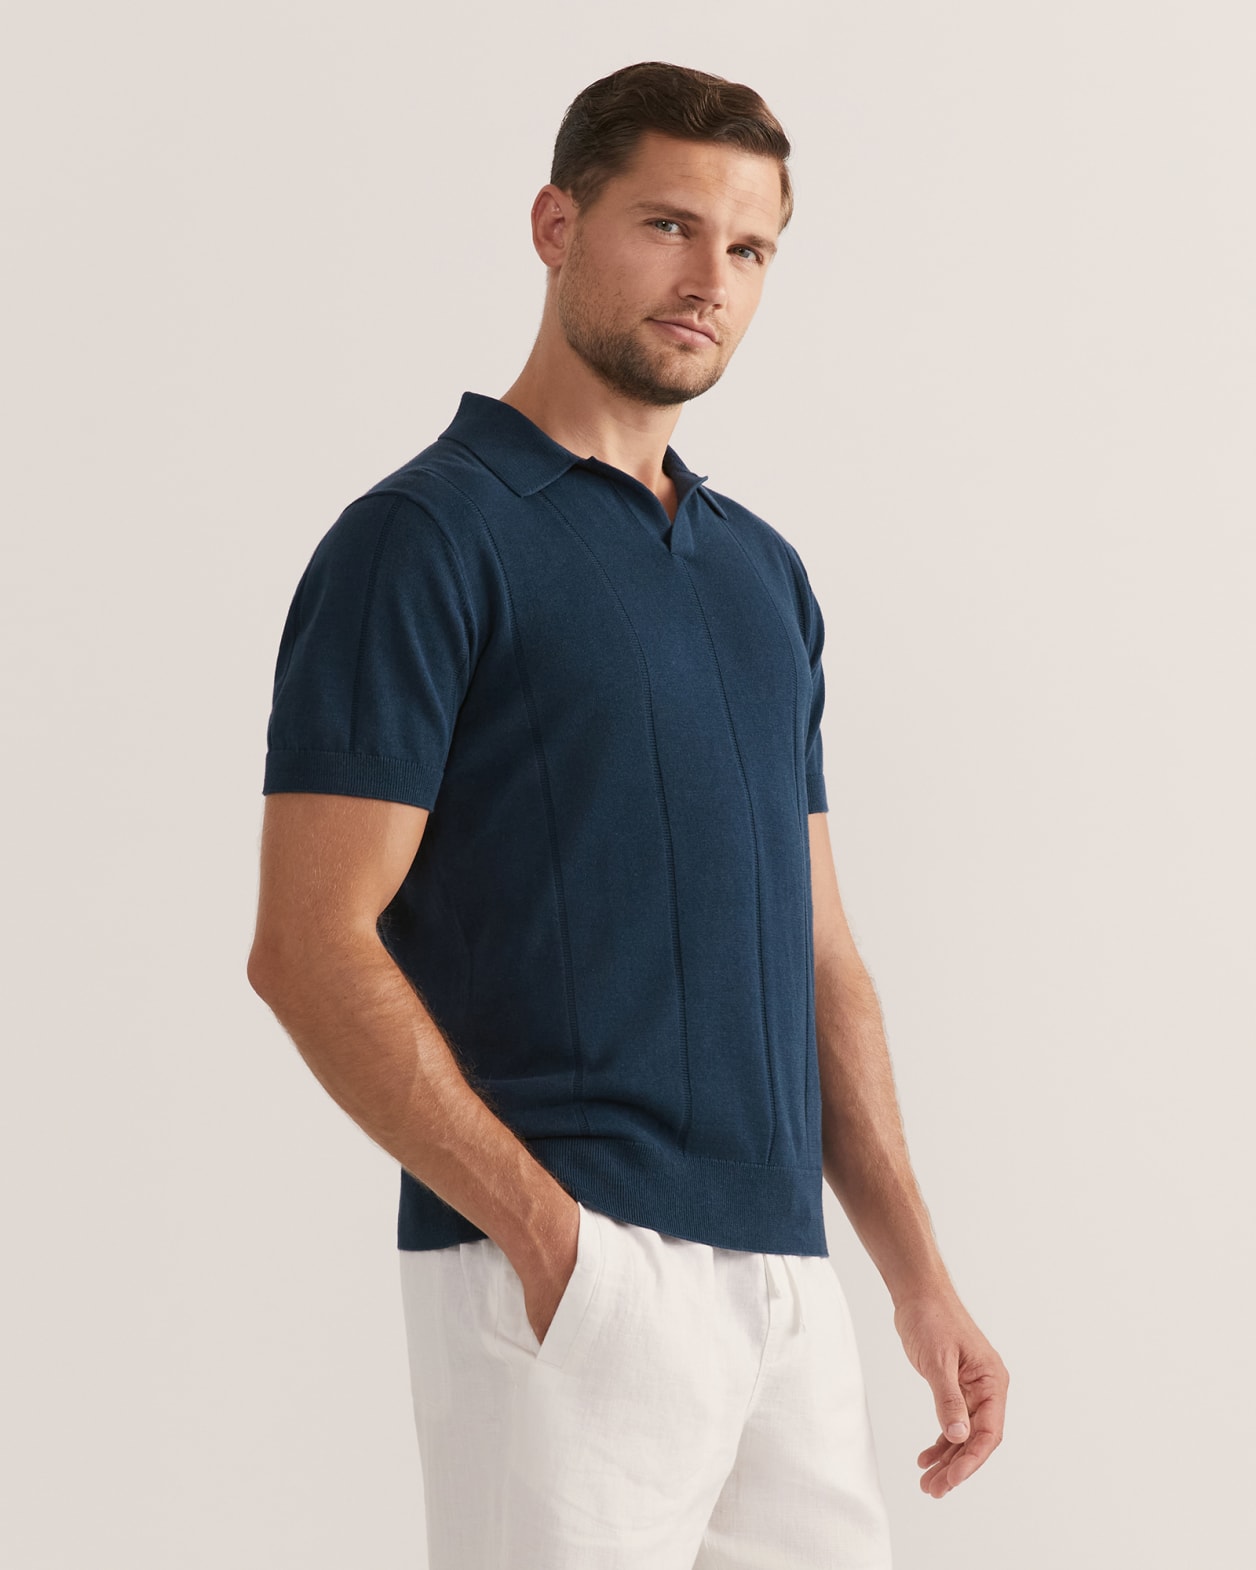 Cornell Knit Polo in INK